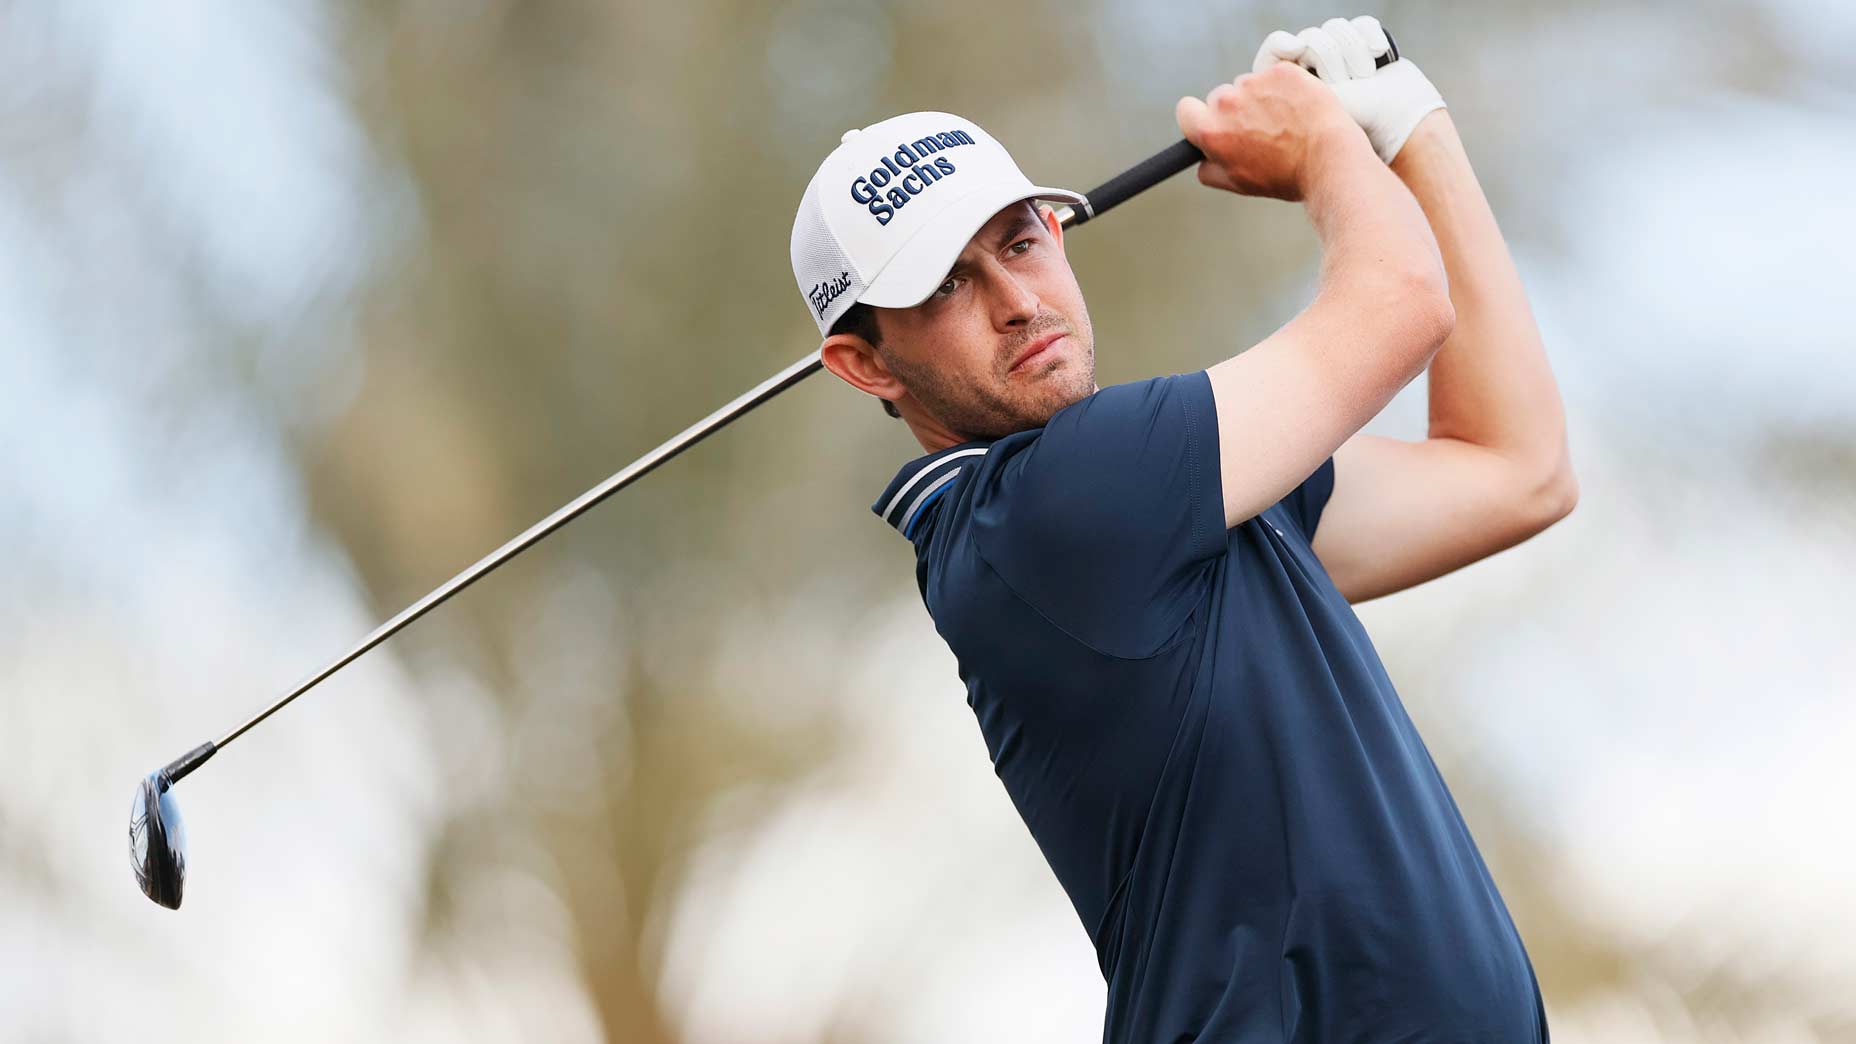 Patrick Cantlay hits shot during third round of 2022 American Express